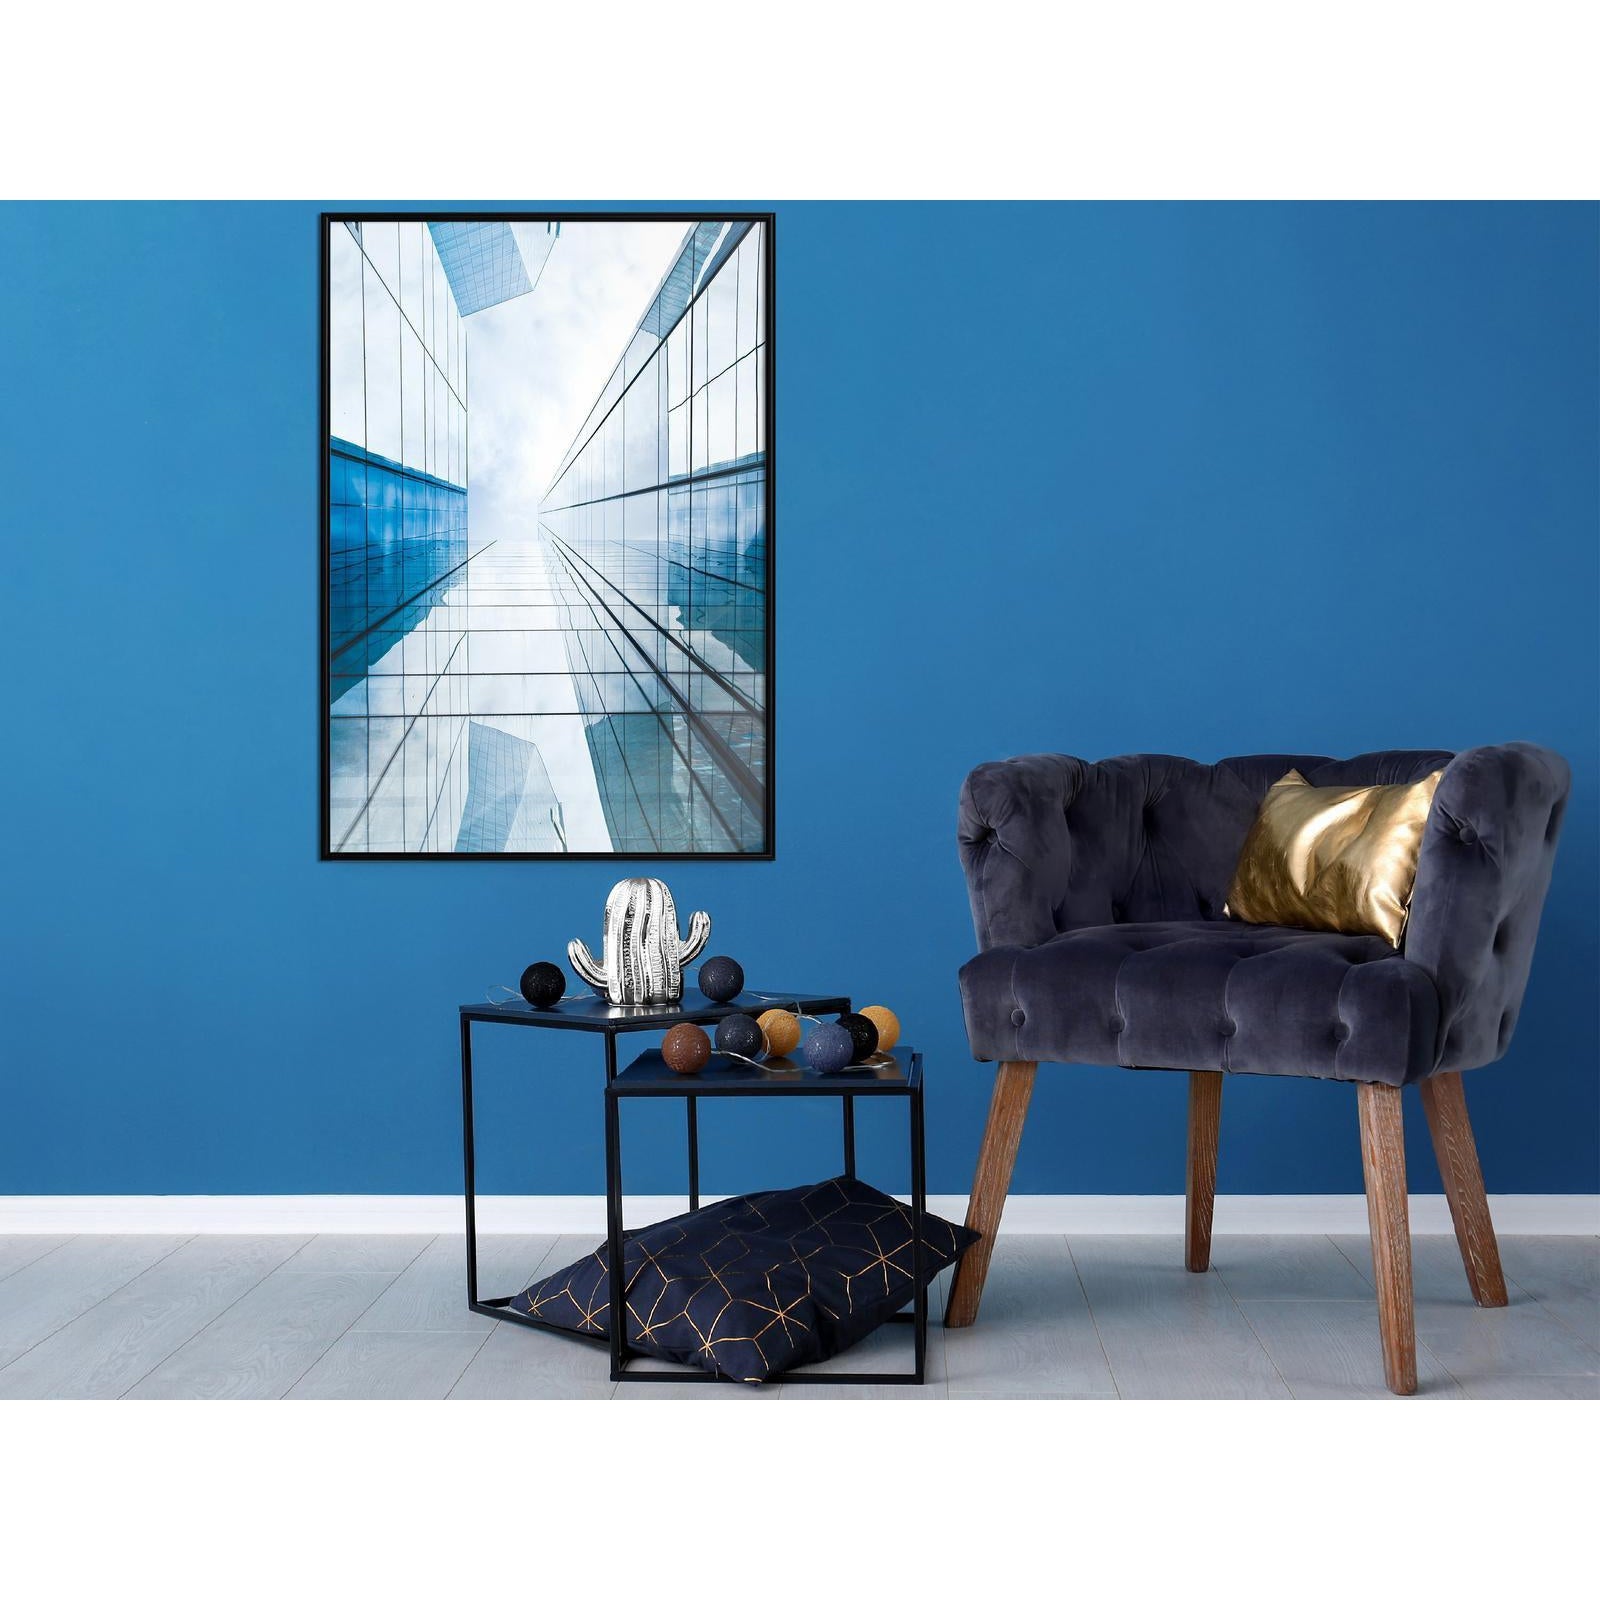 Inramad Poster / Tavla - Steel and Glass (Blue)-Poster Inramad-Artgeist-peaceofhome.se